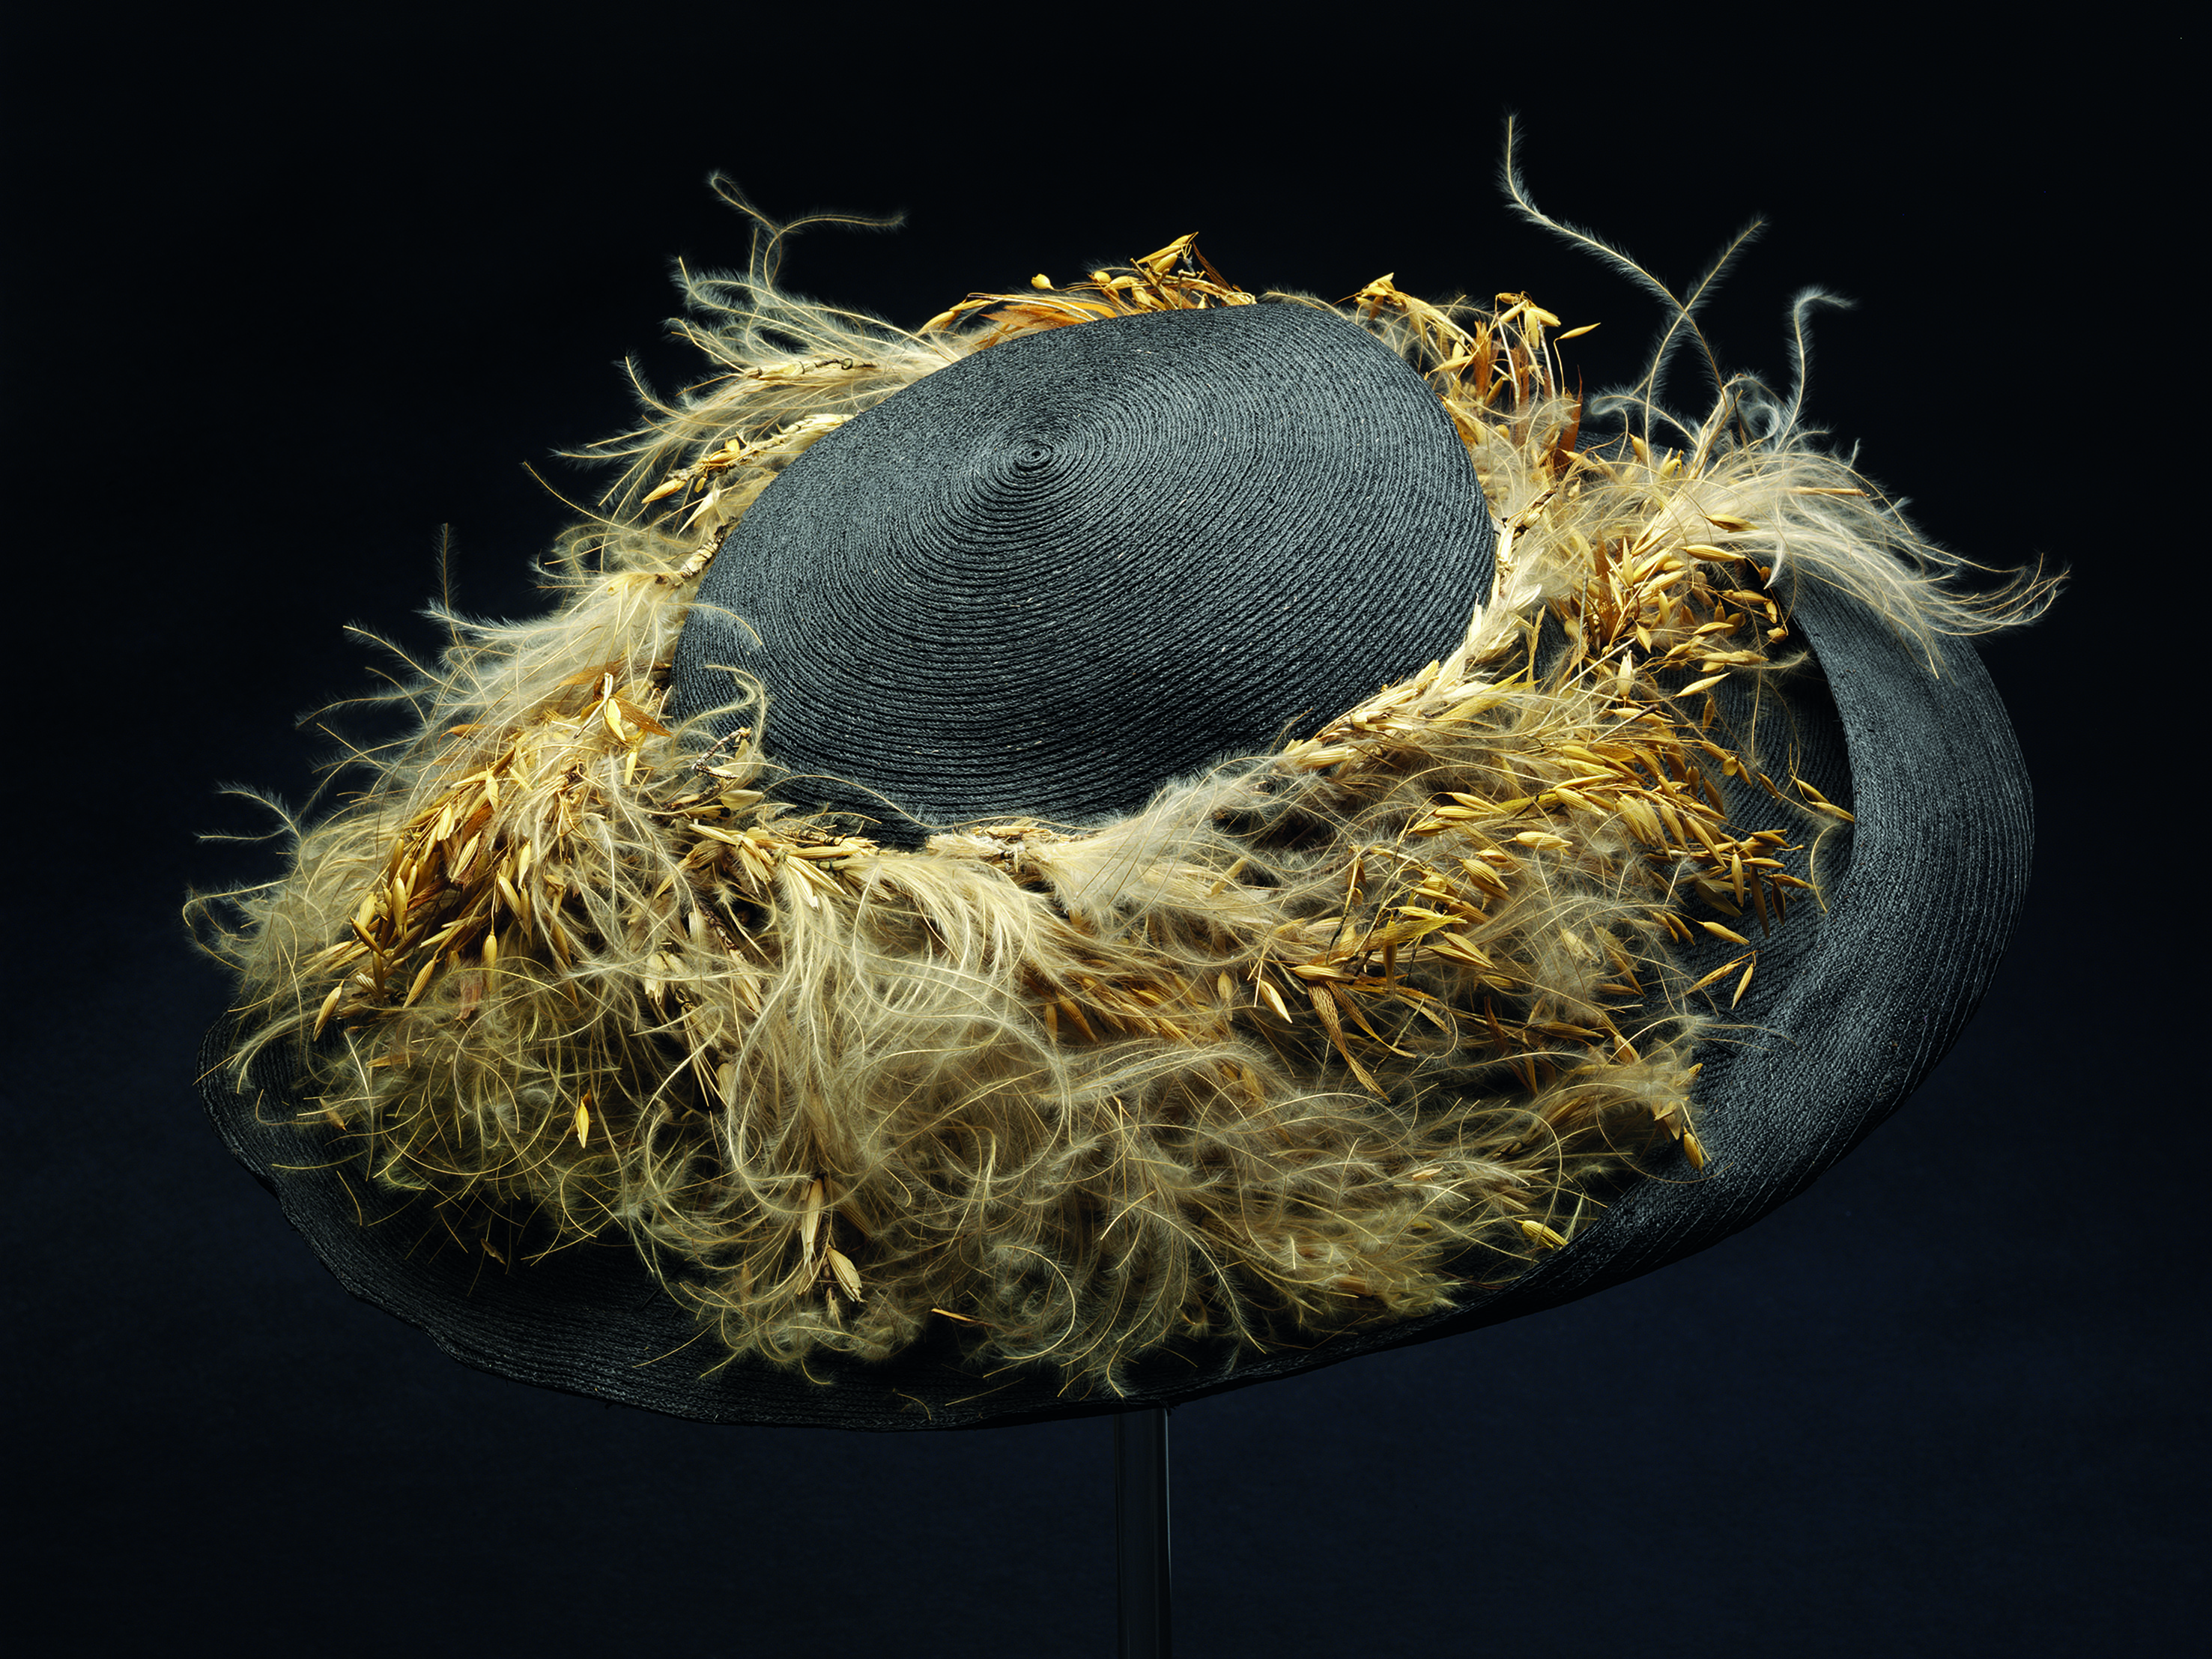 T.235-1960 Hat Straw hat trimmed with ostrich feathers and barley, designed by Suzanne Talbot, England, ca. 1910 Suzanne Talbot England Ca. 1910 Straw, trimmed with ostrich feathers and barley